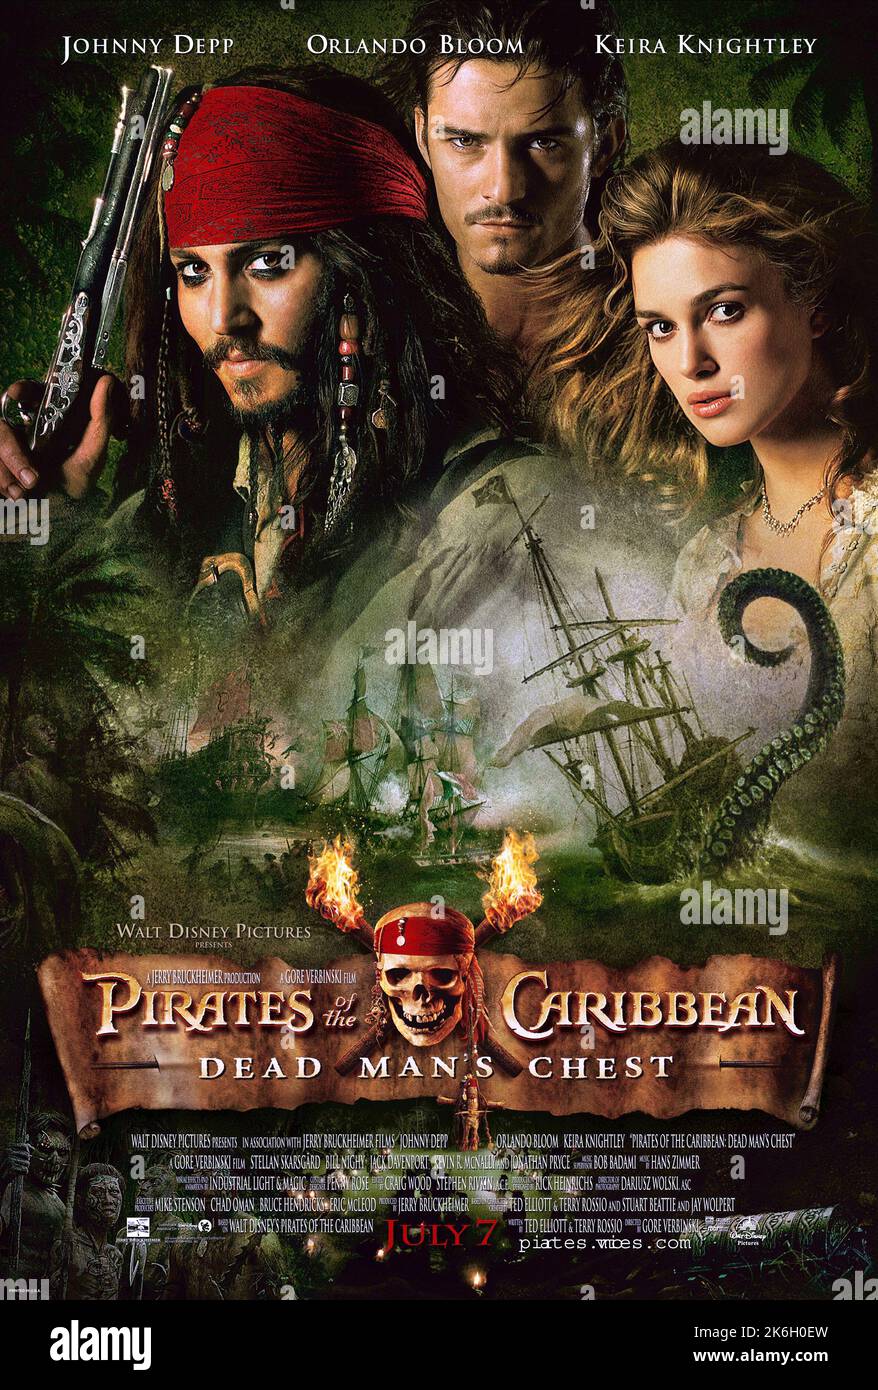 Pirates of the Caribbean Dead Man's Chest 2006 Johnny Depp, Orlando Bloom & Keira Knightley poster Foto Stock